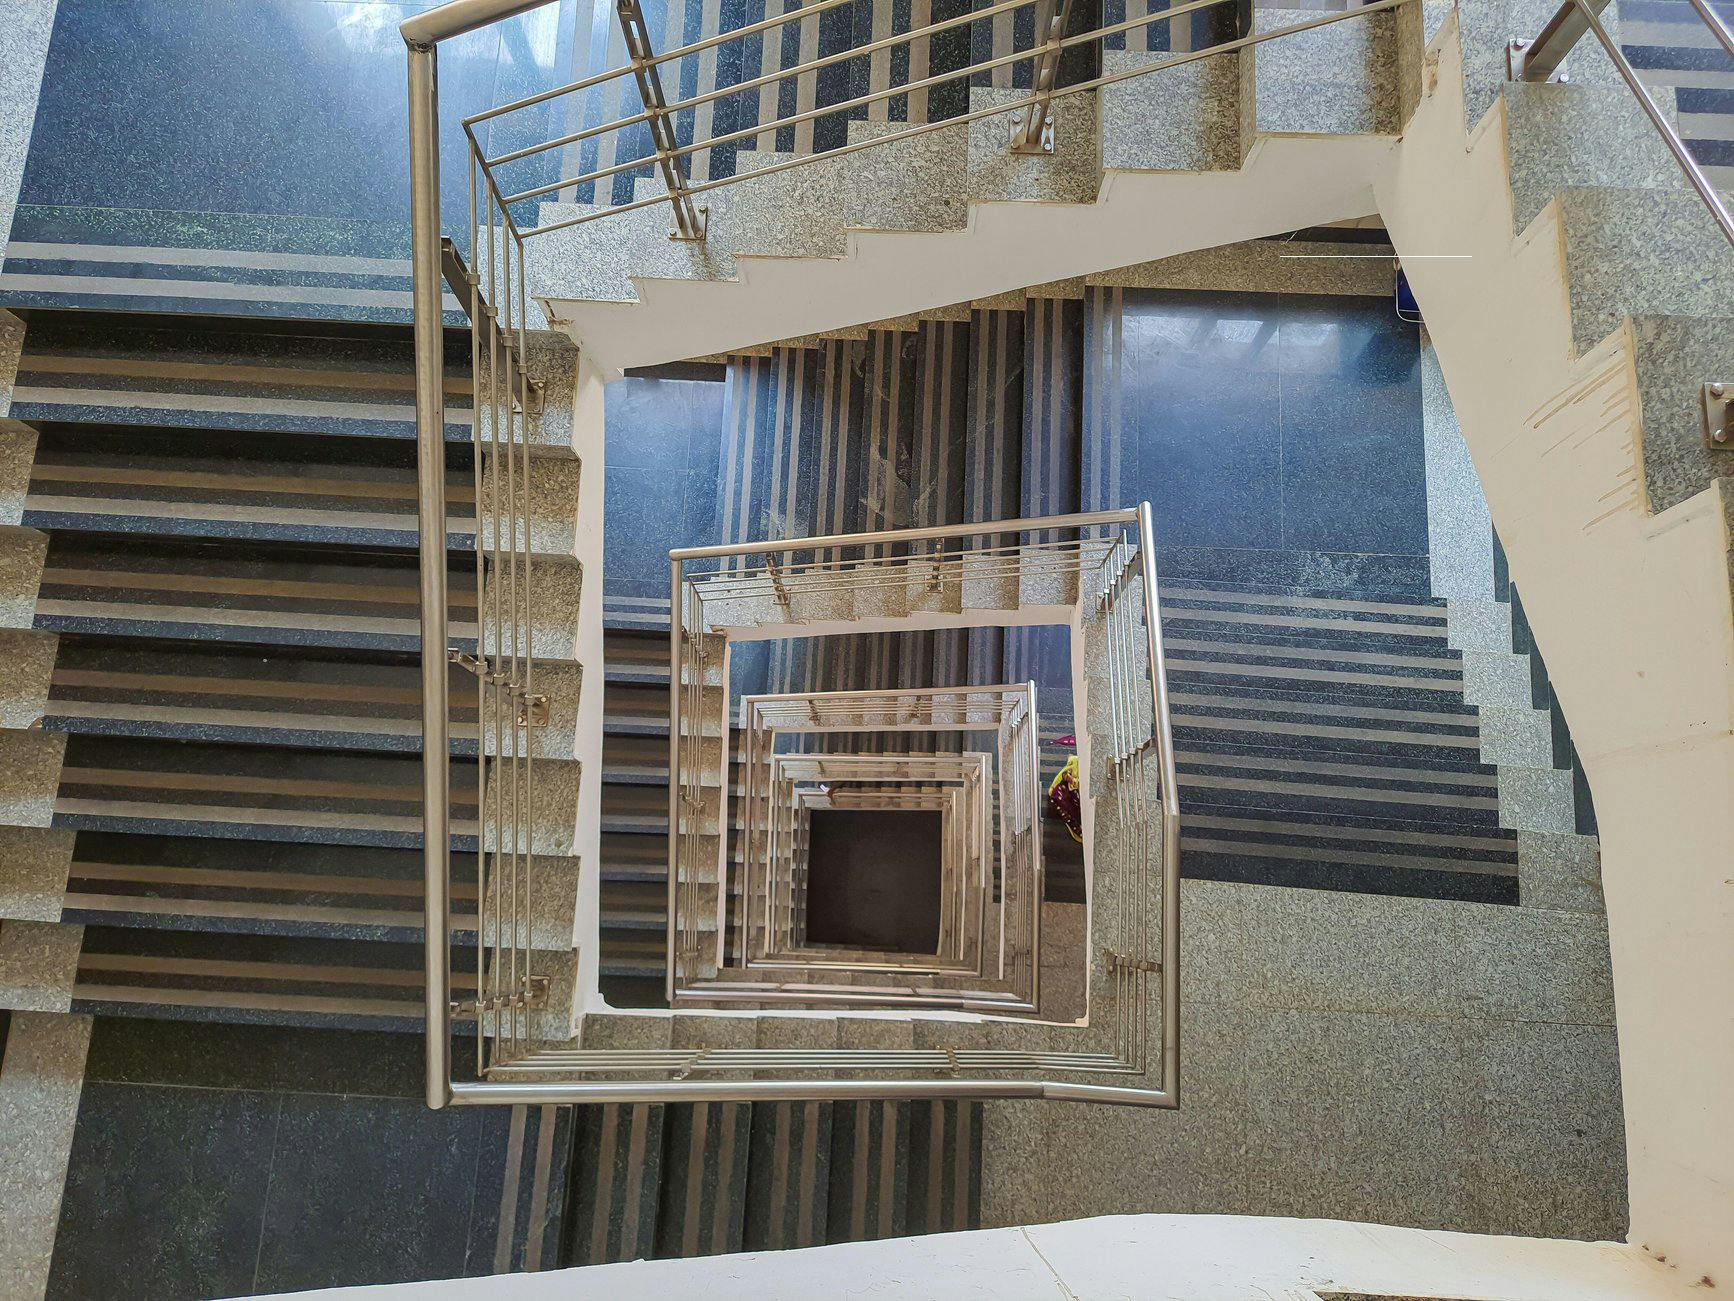 Second Staircase Transition